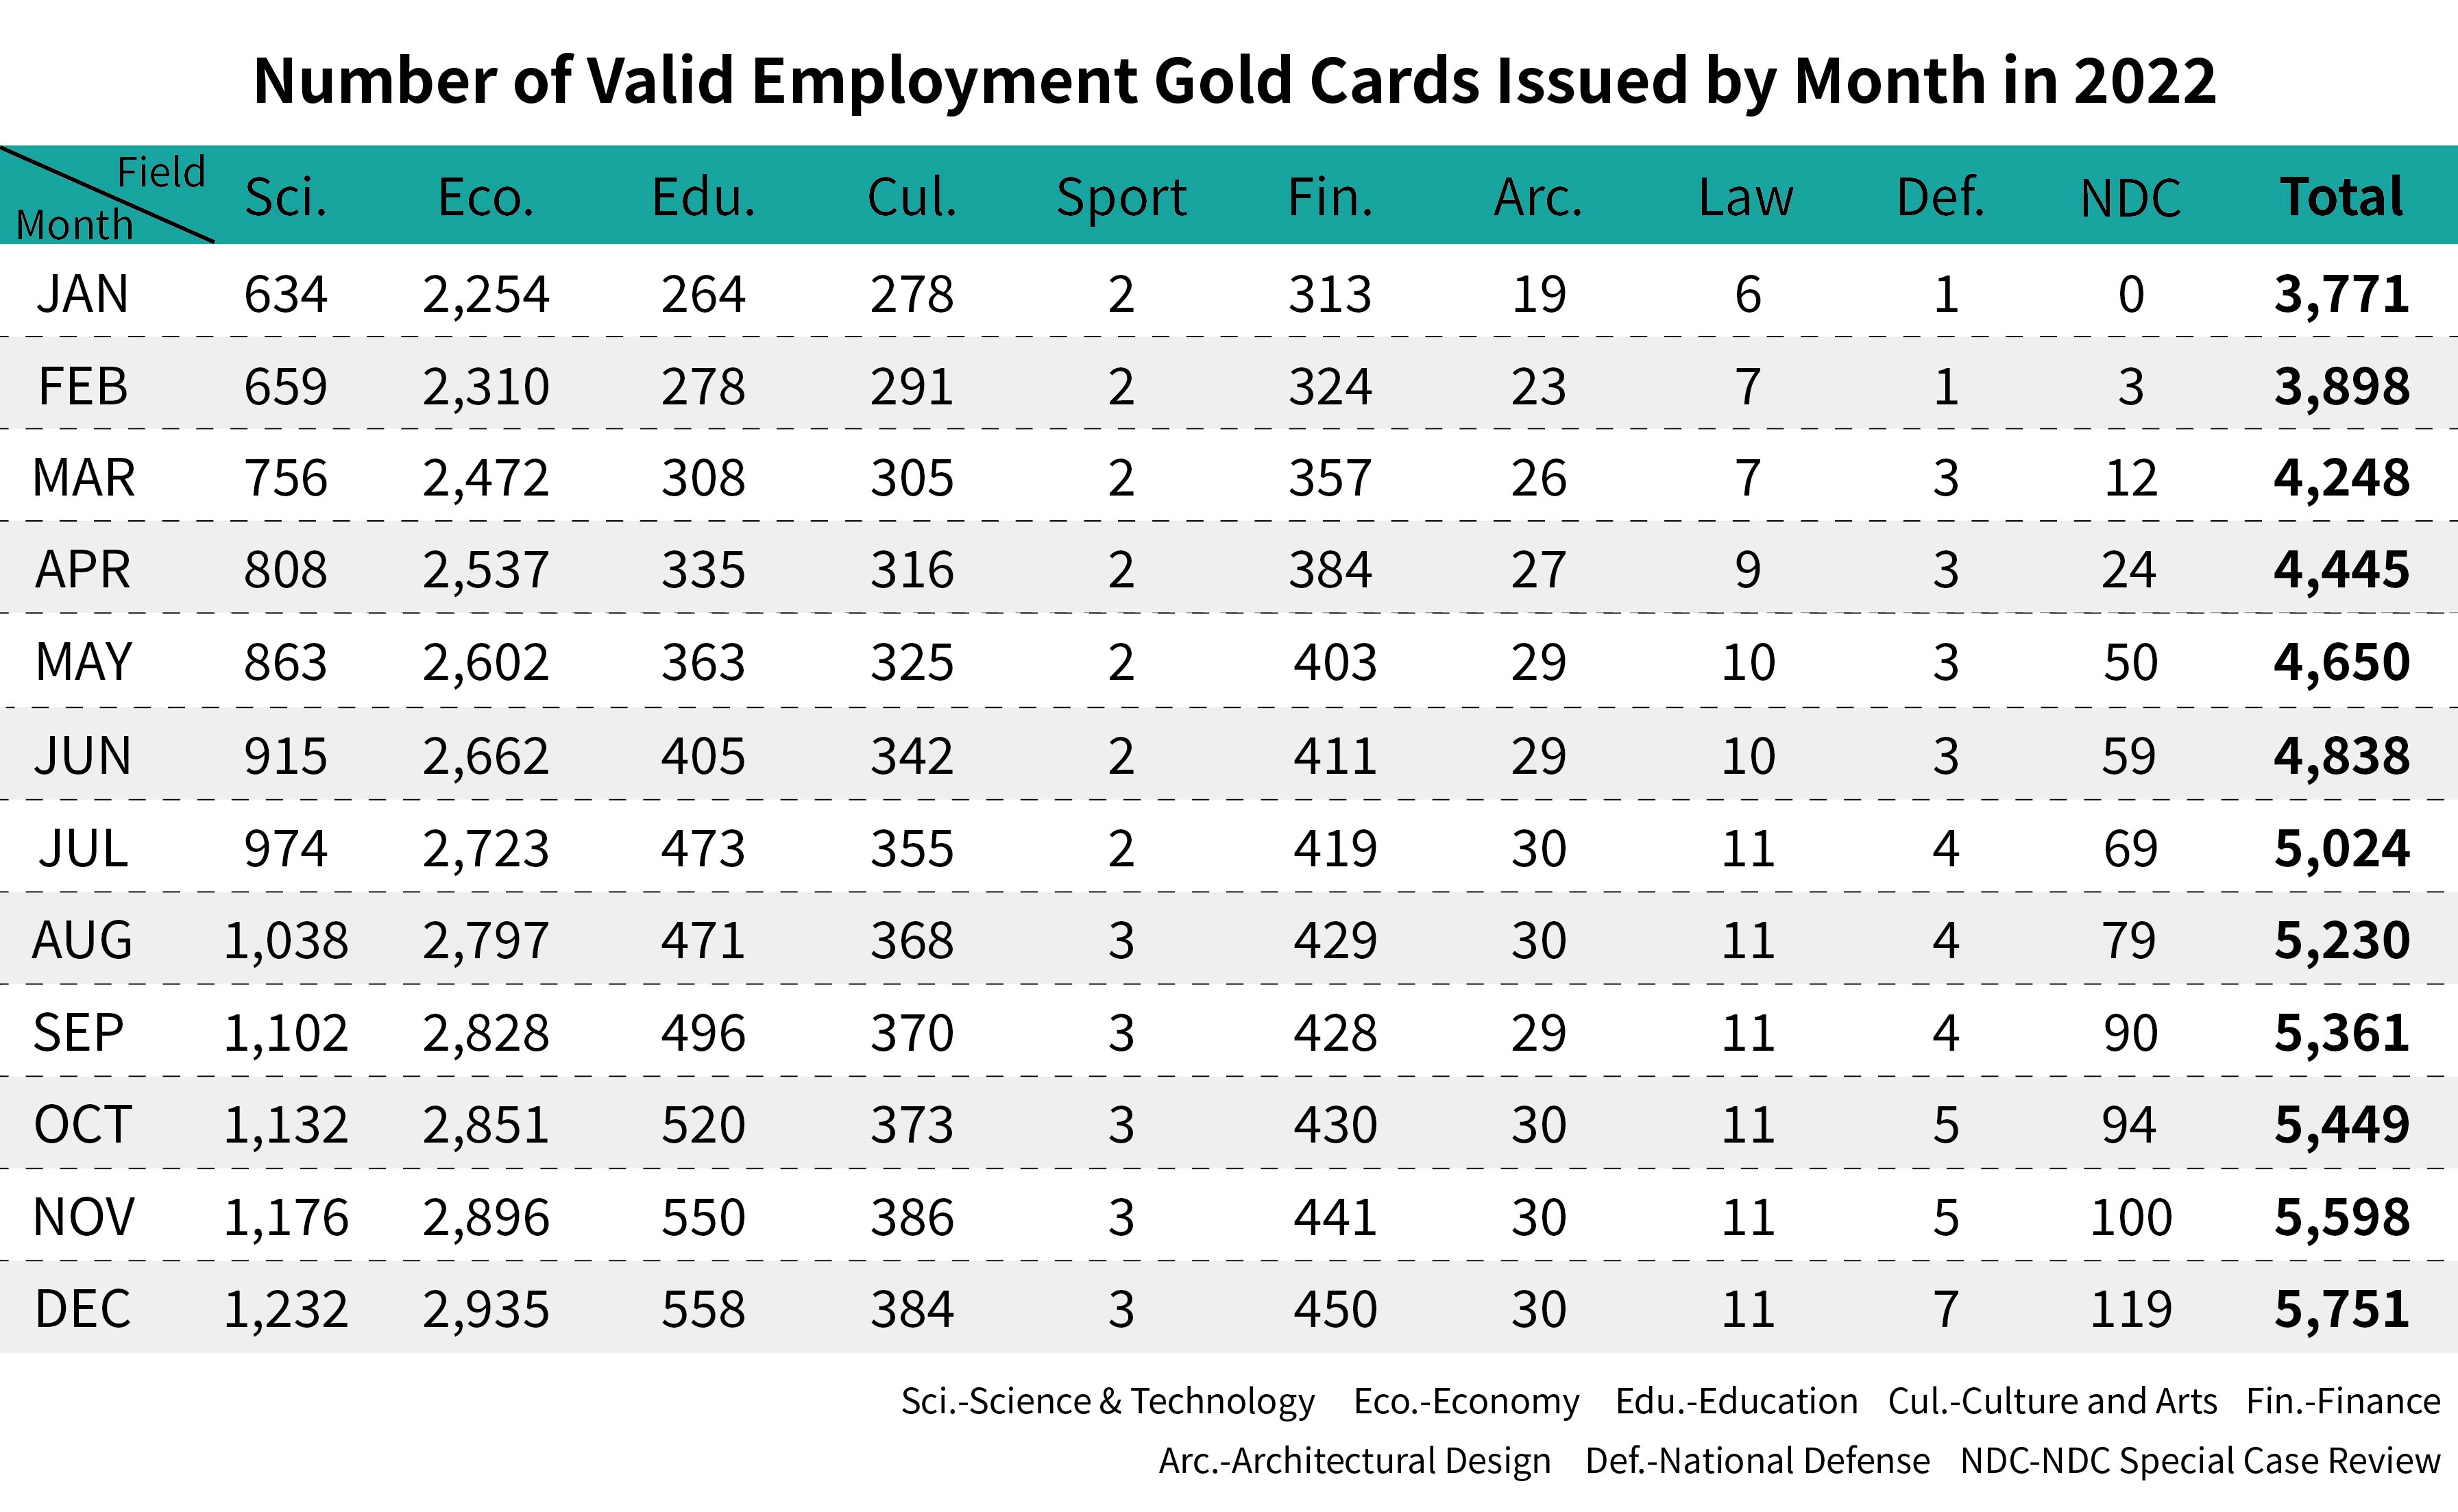 Number of Valid Employment Gold Cards Issued by Month-December